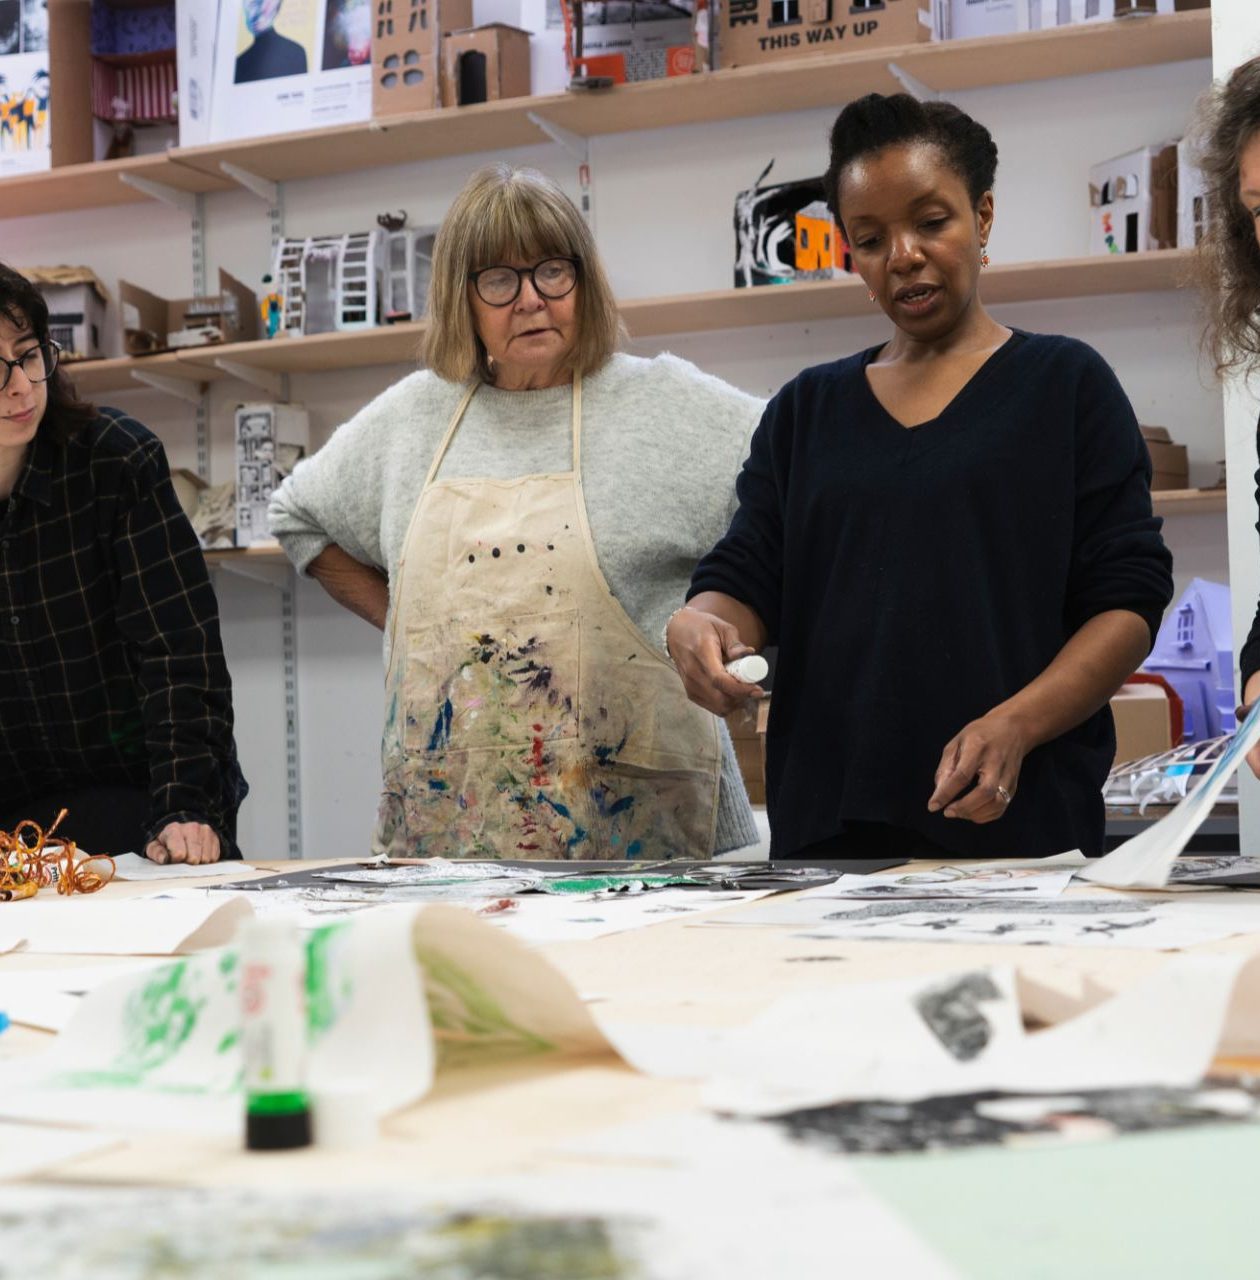  For the 2022 Falmouth Illustration Festival Rose Forshall runs a workshop at BA Illustration Level 1, Falmouth Campus. People worked in groups or individually to create their illustrations.